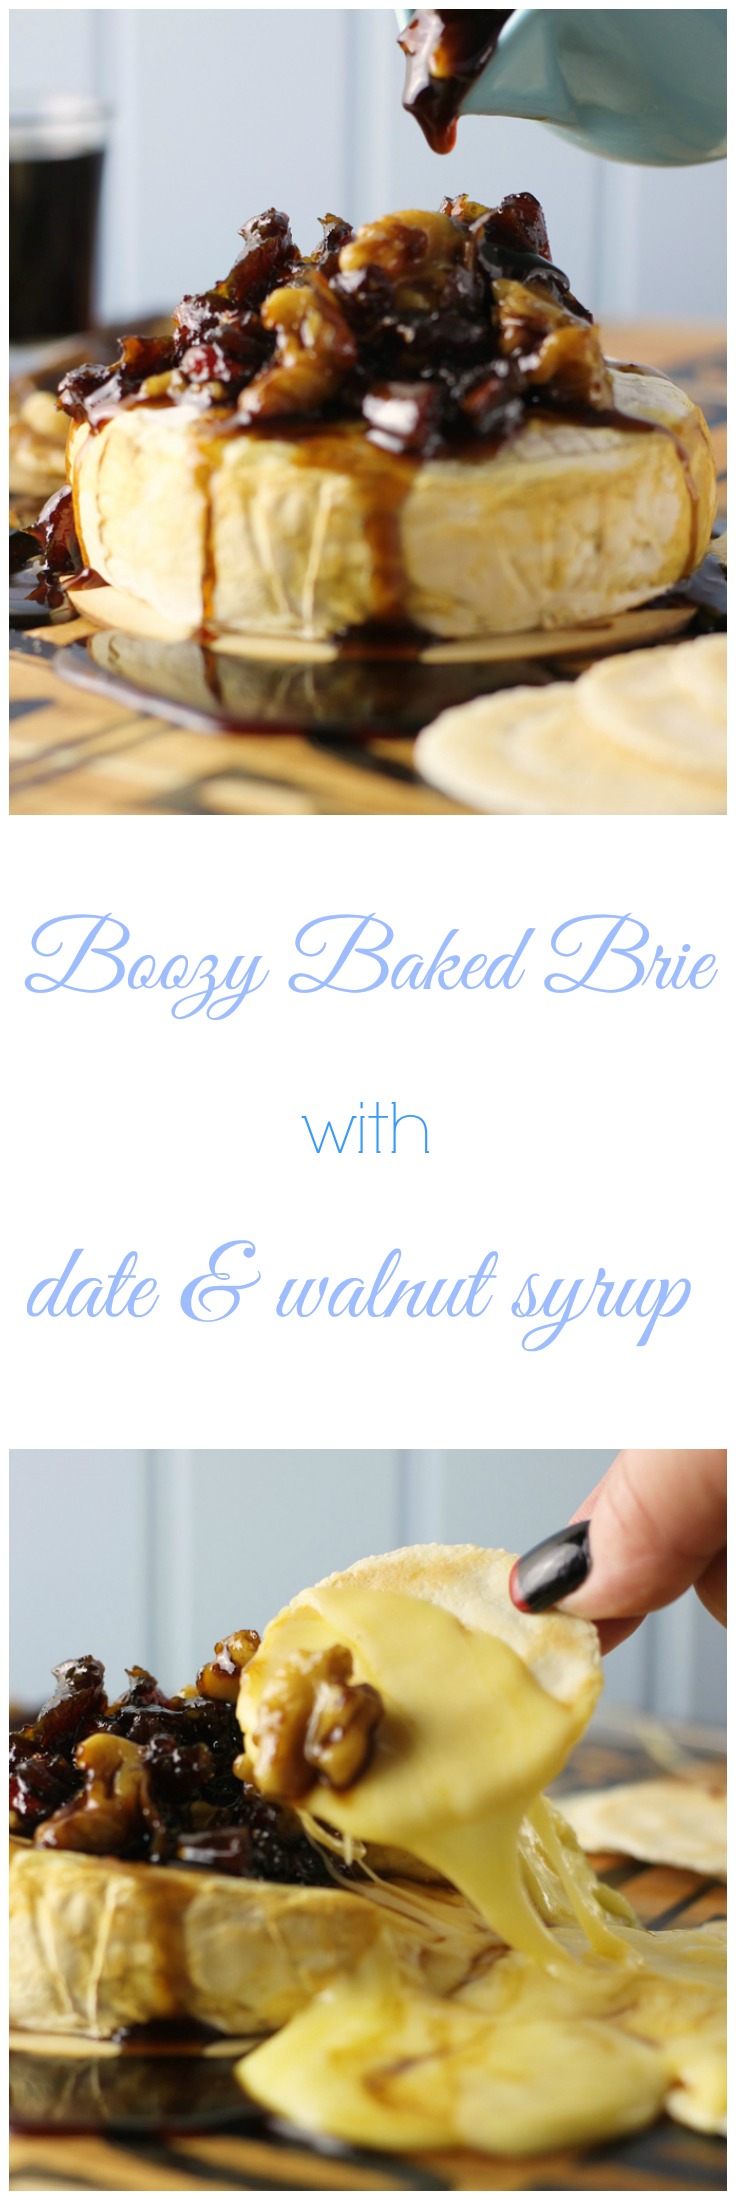 Boozy Baked Brie with Date & Walnut Syrup